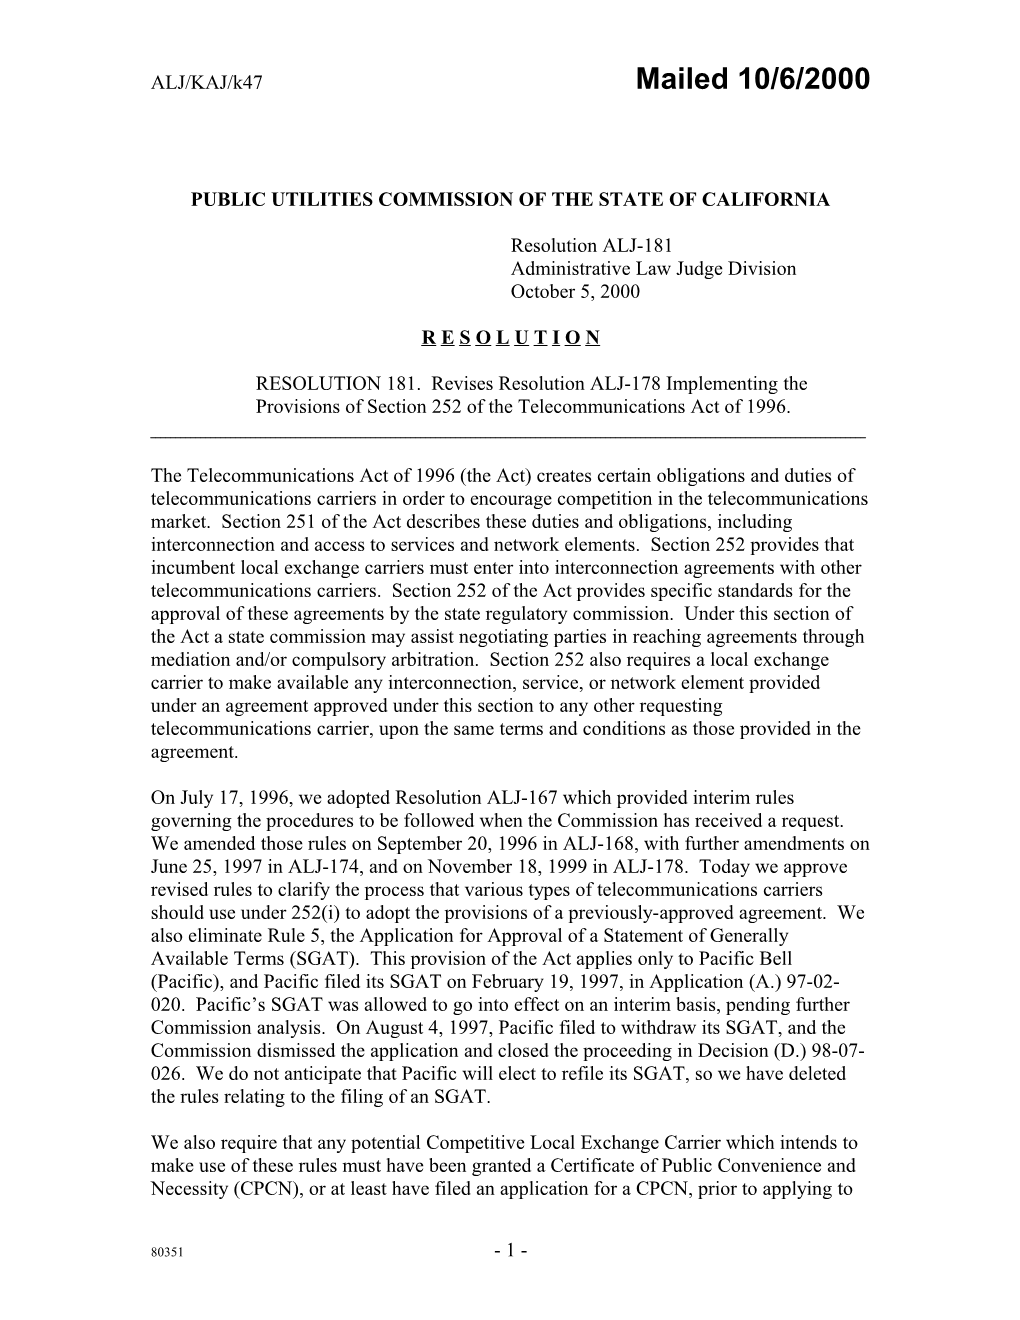 Public Utilities Commission of the State of California s148